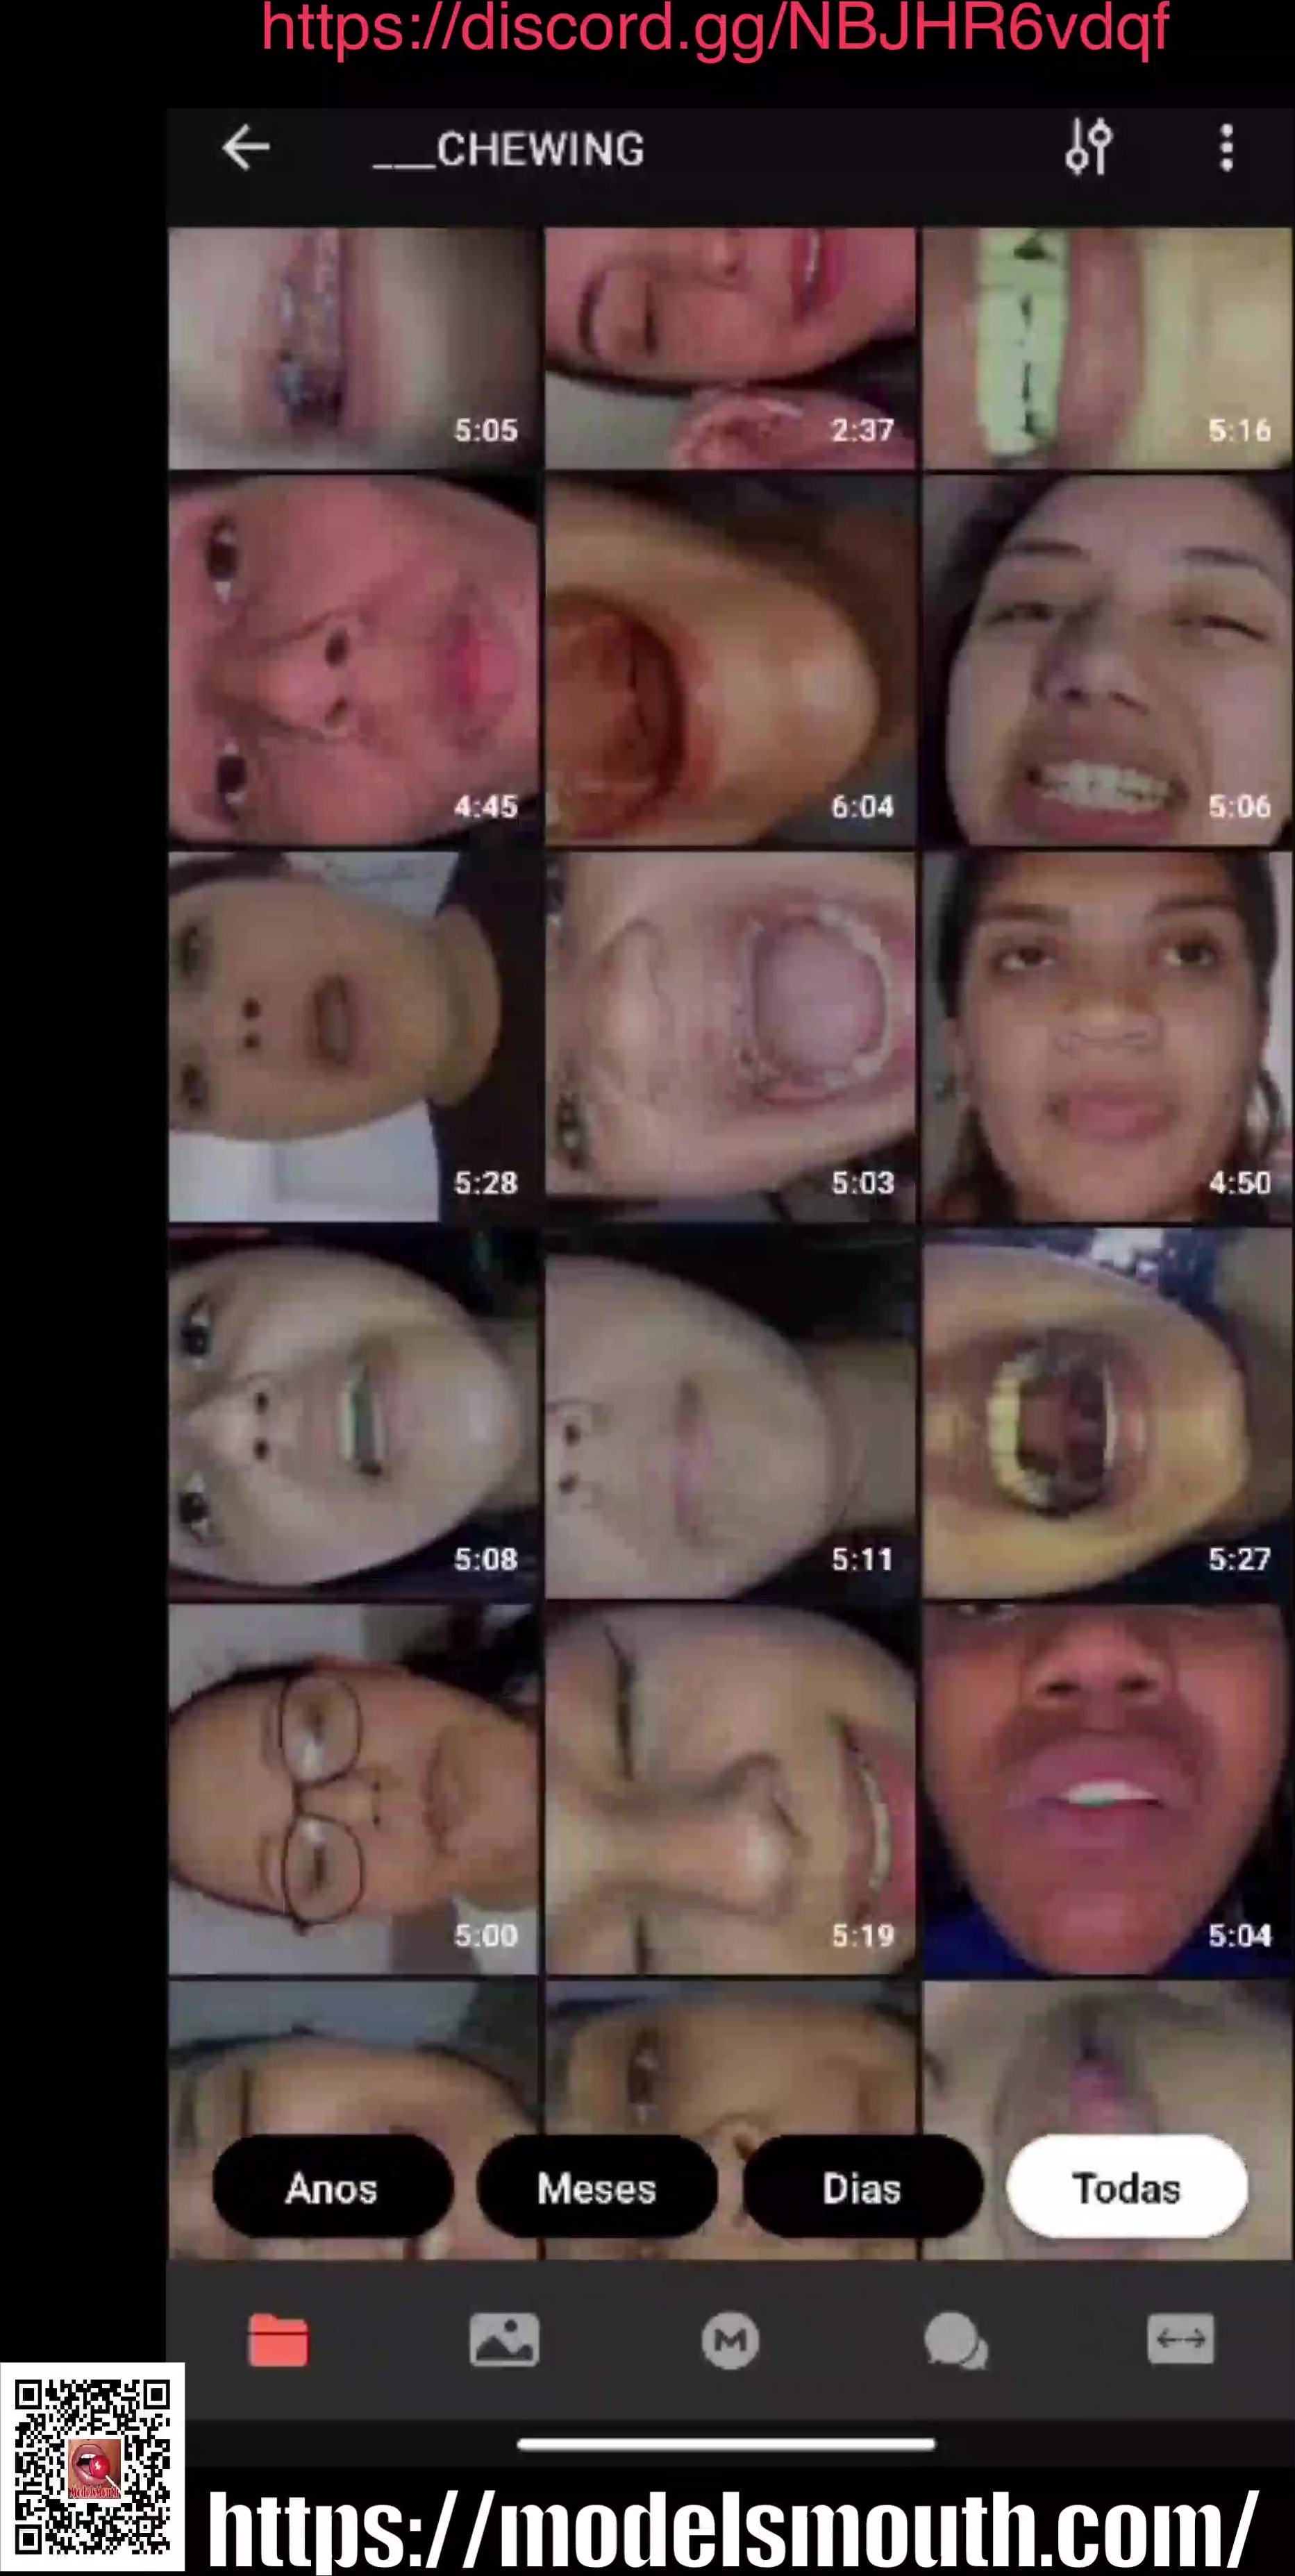 Brazilian Mouth Collection